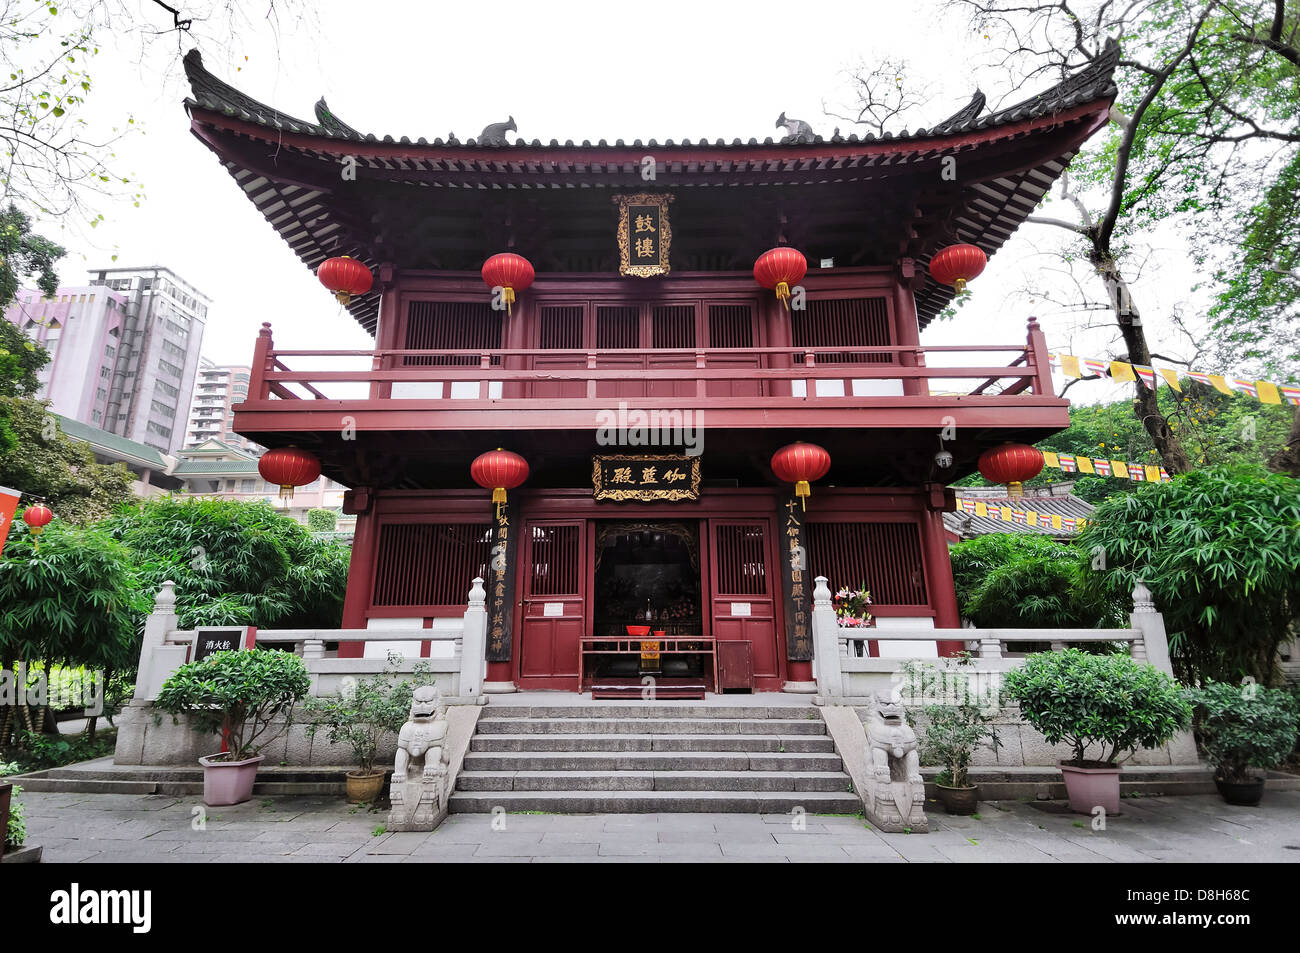 Temple building at the Guangxiao Temple complex, Guangzhou, China Stock Photo